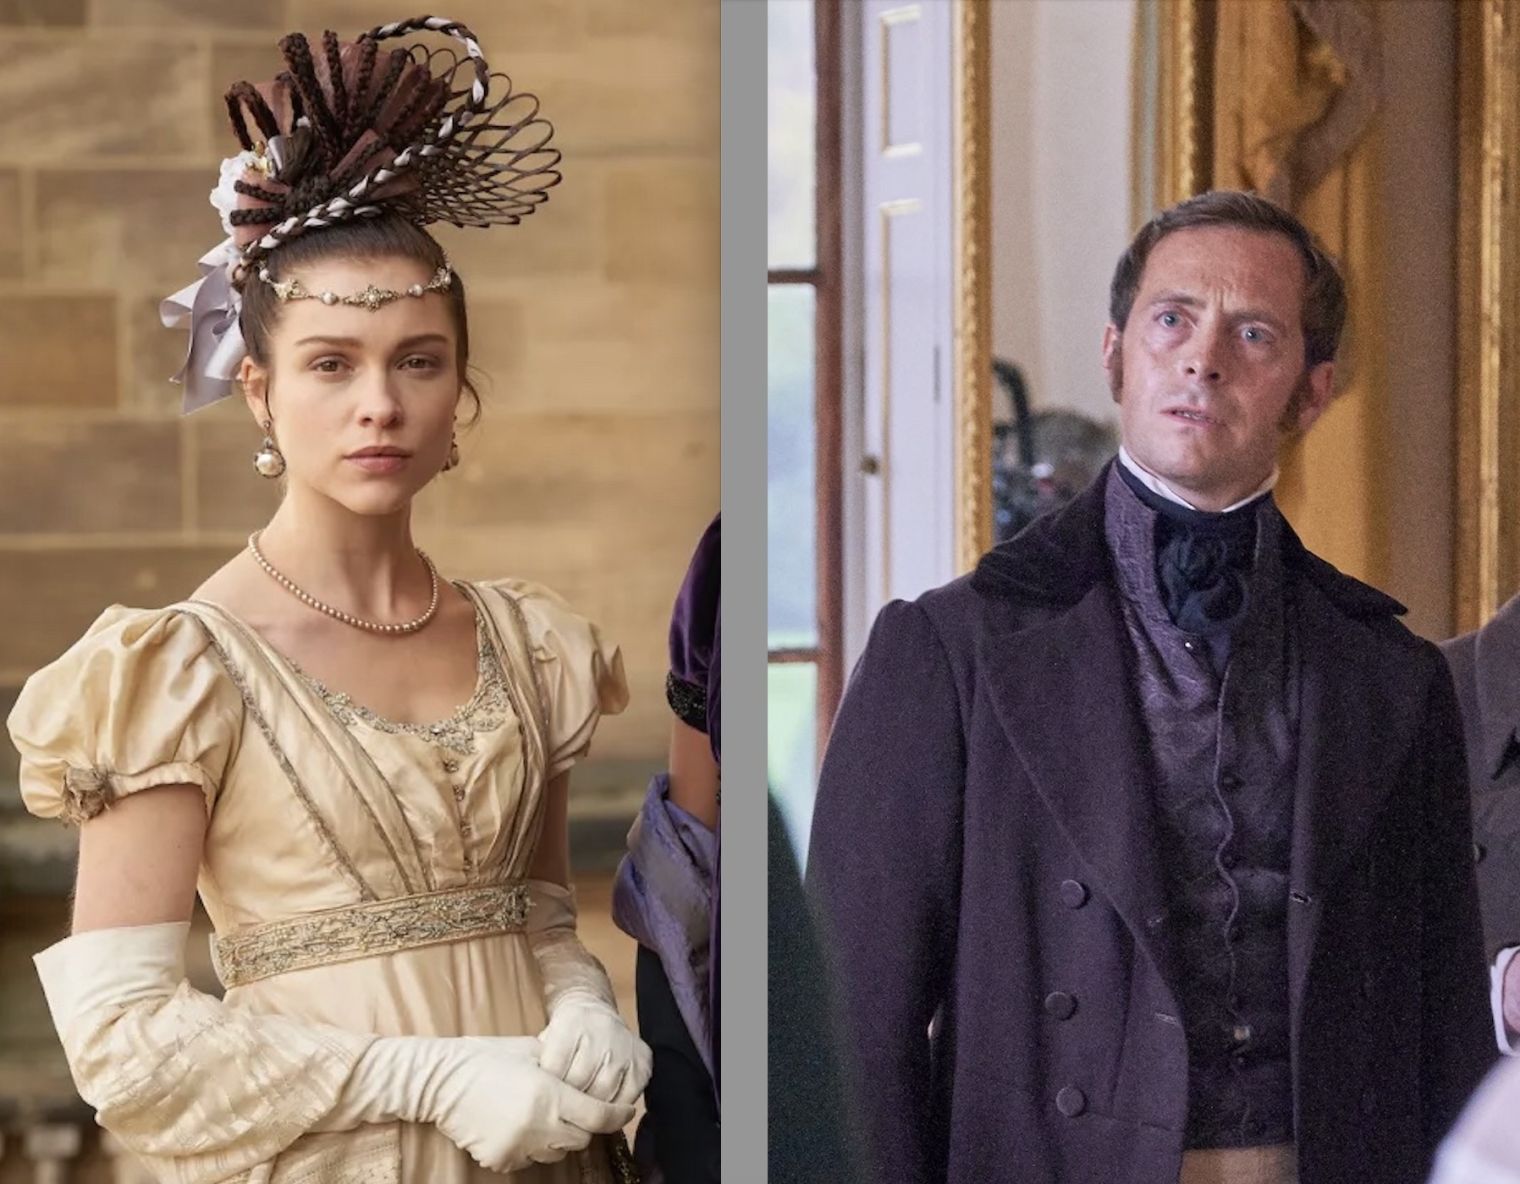 Sophie Cookson and Stephen Campbell Moore to star in new ITVX period drama 'The Confessions of Frannie Langton'